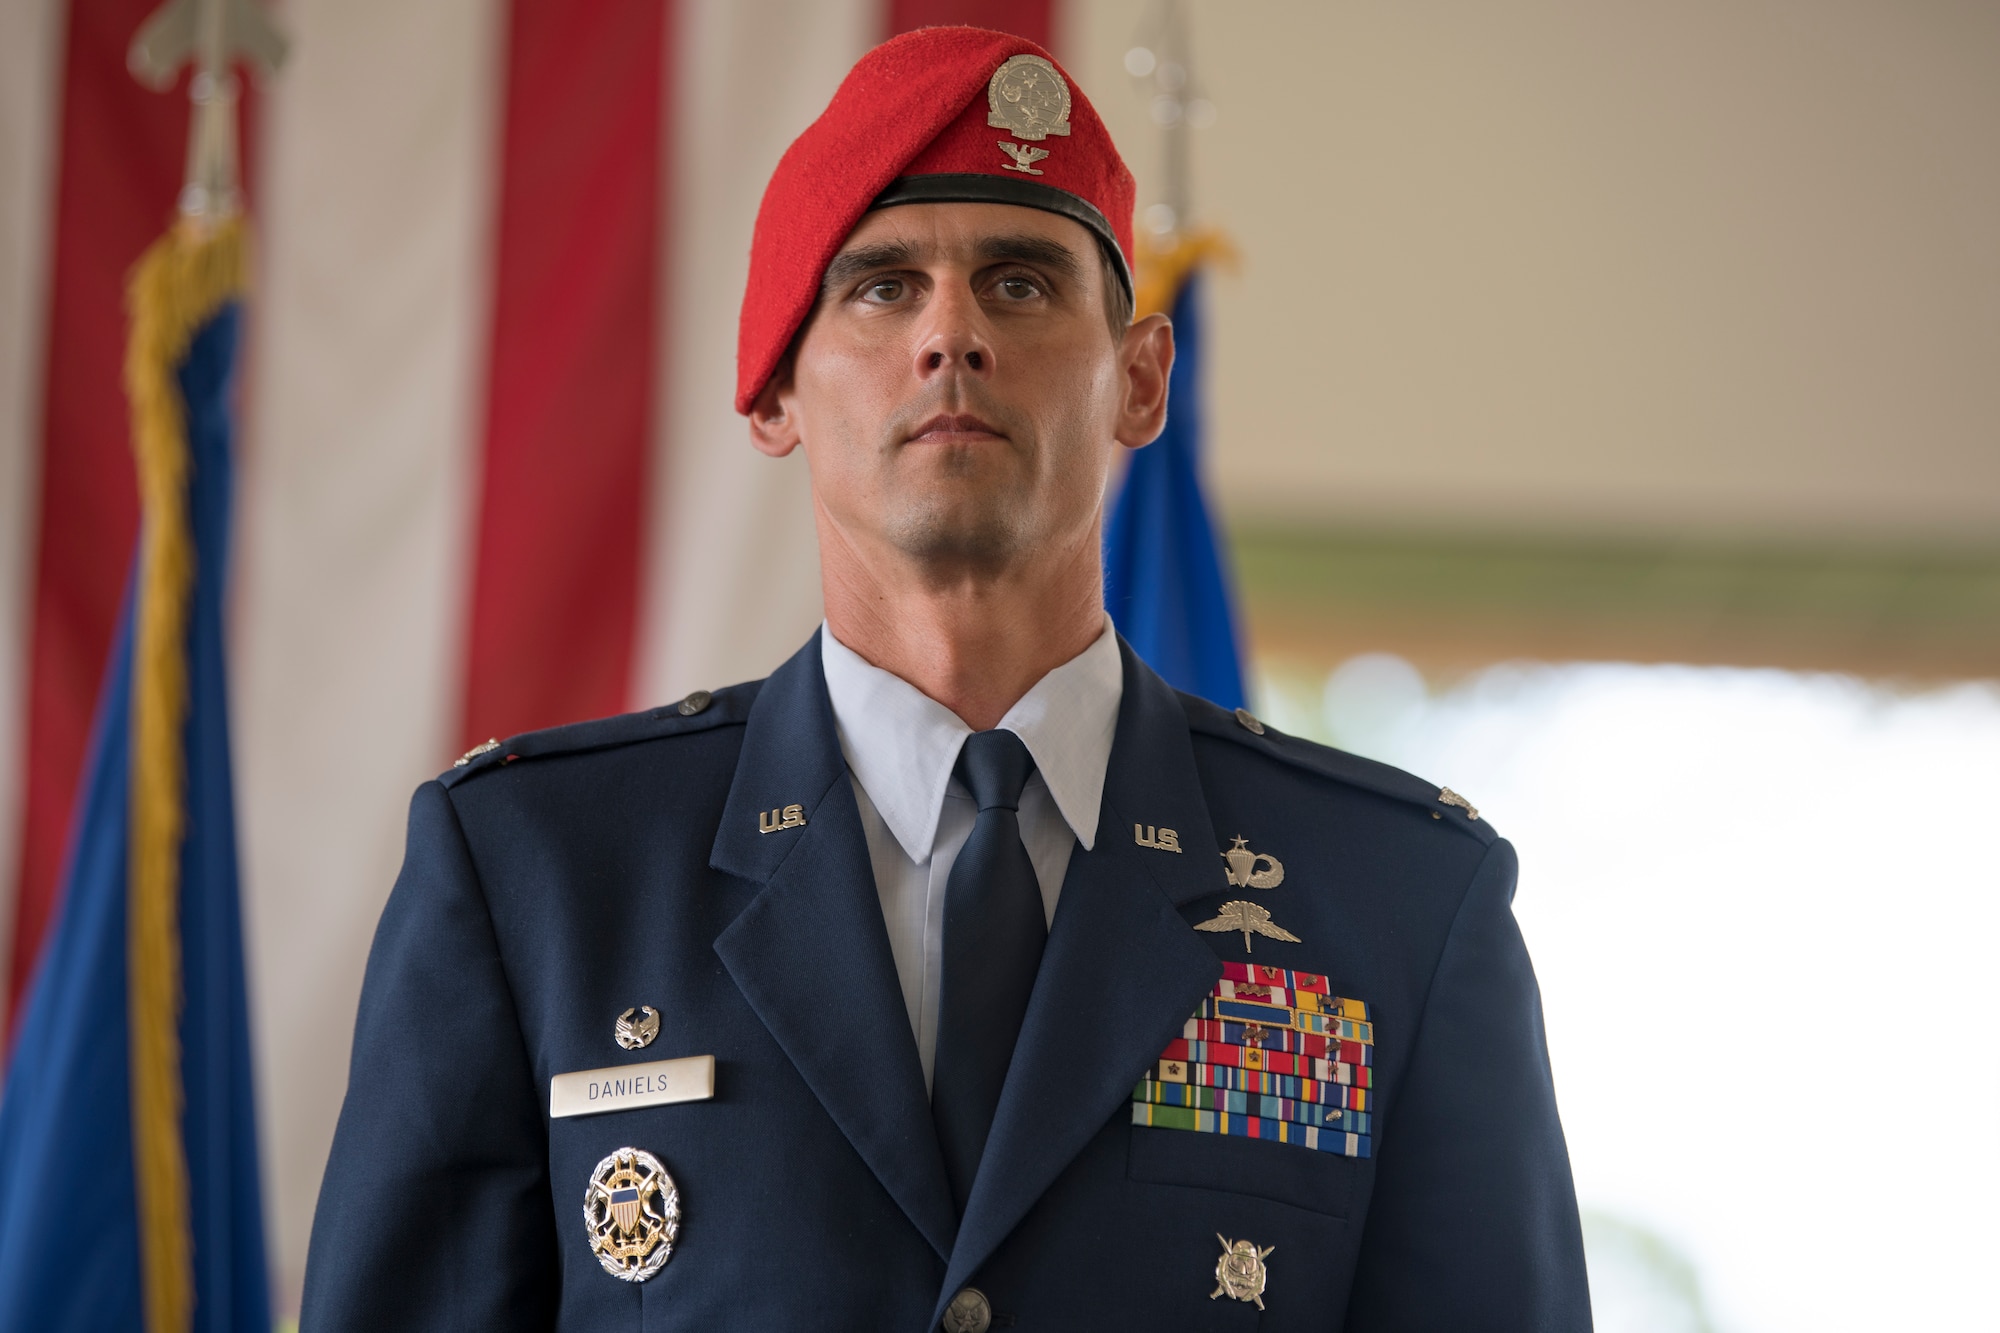 U.S. Air Force Col. Jason Daniels is the commander of the 24th Special Operations Wing at Hurlburt Field, Florida, June 4, 2021.